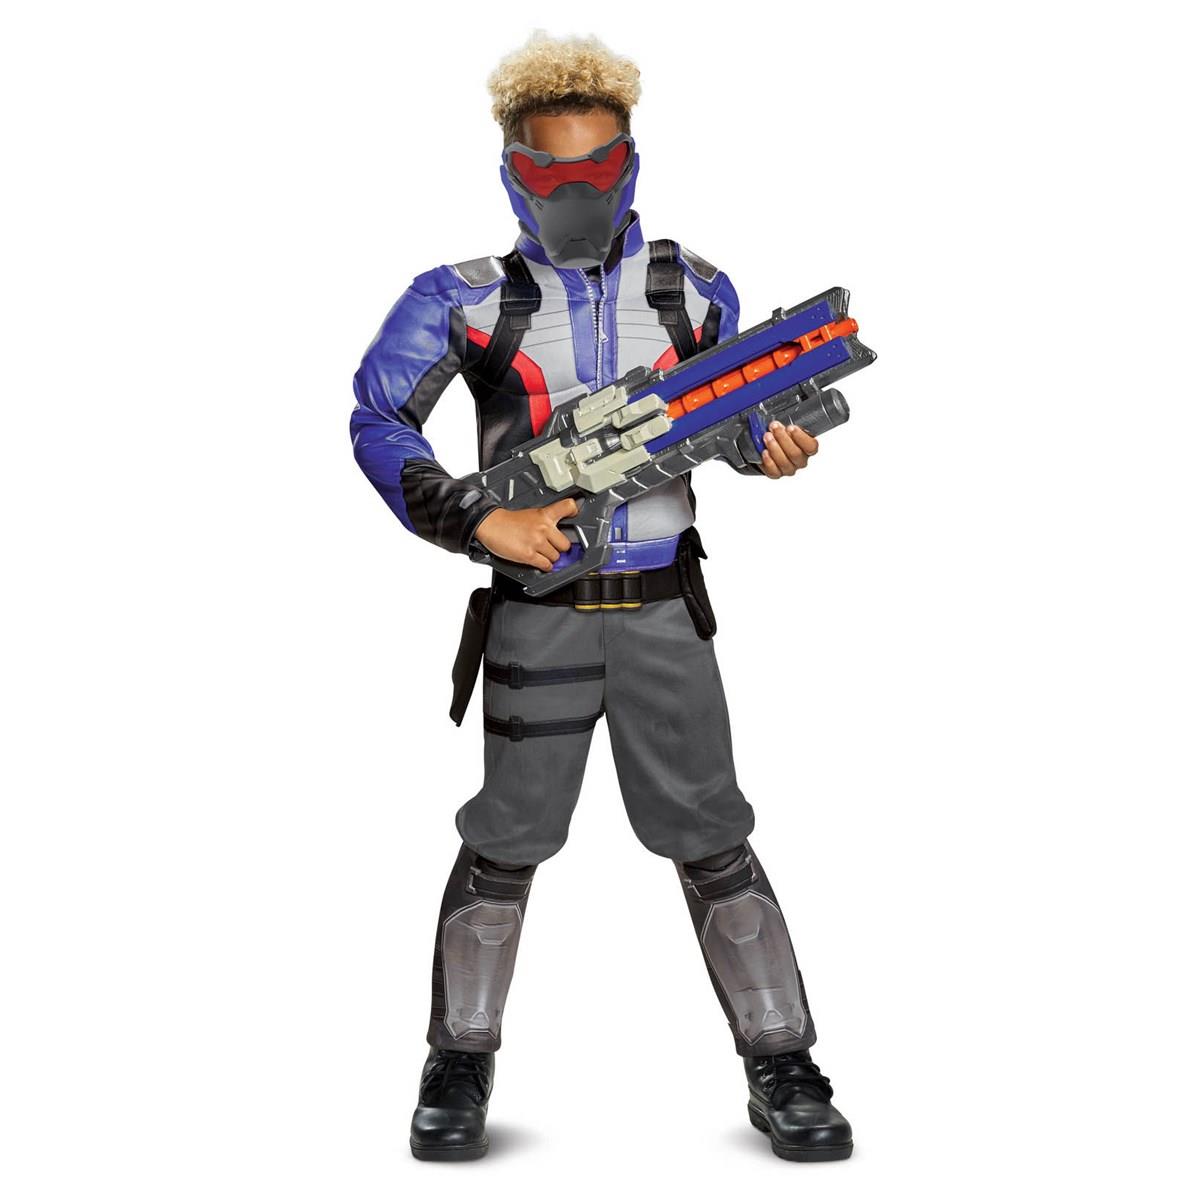 Dispguise Disguise 276113 Halloween Overwatch Soldier 76 Classic Muscle Teen Costume - Extra Large